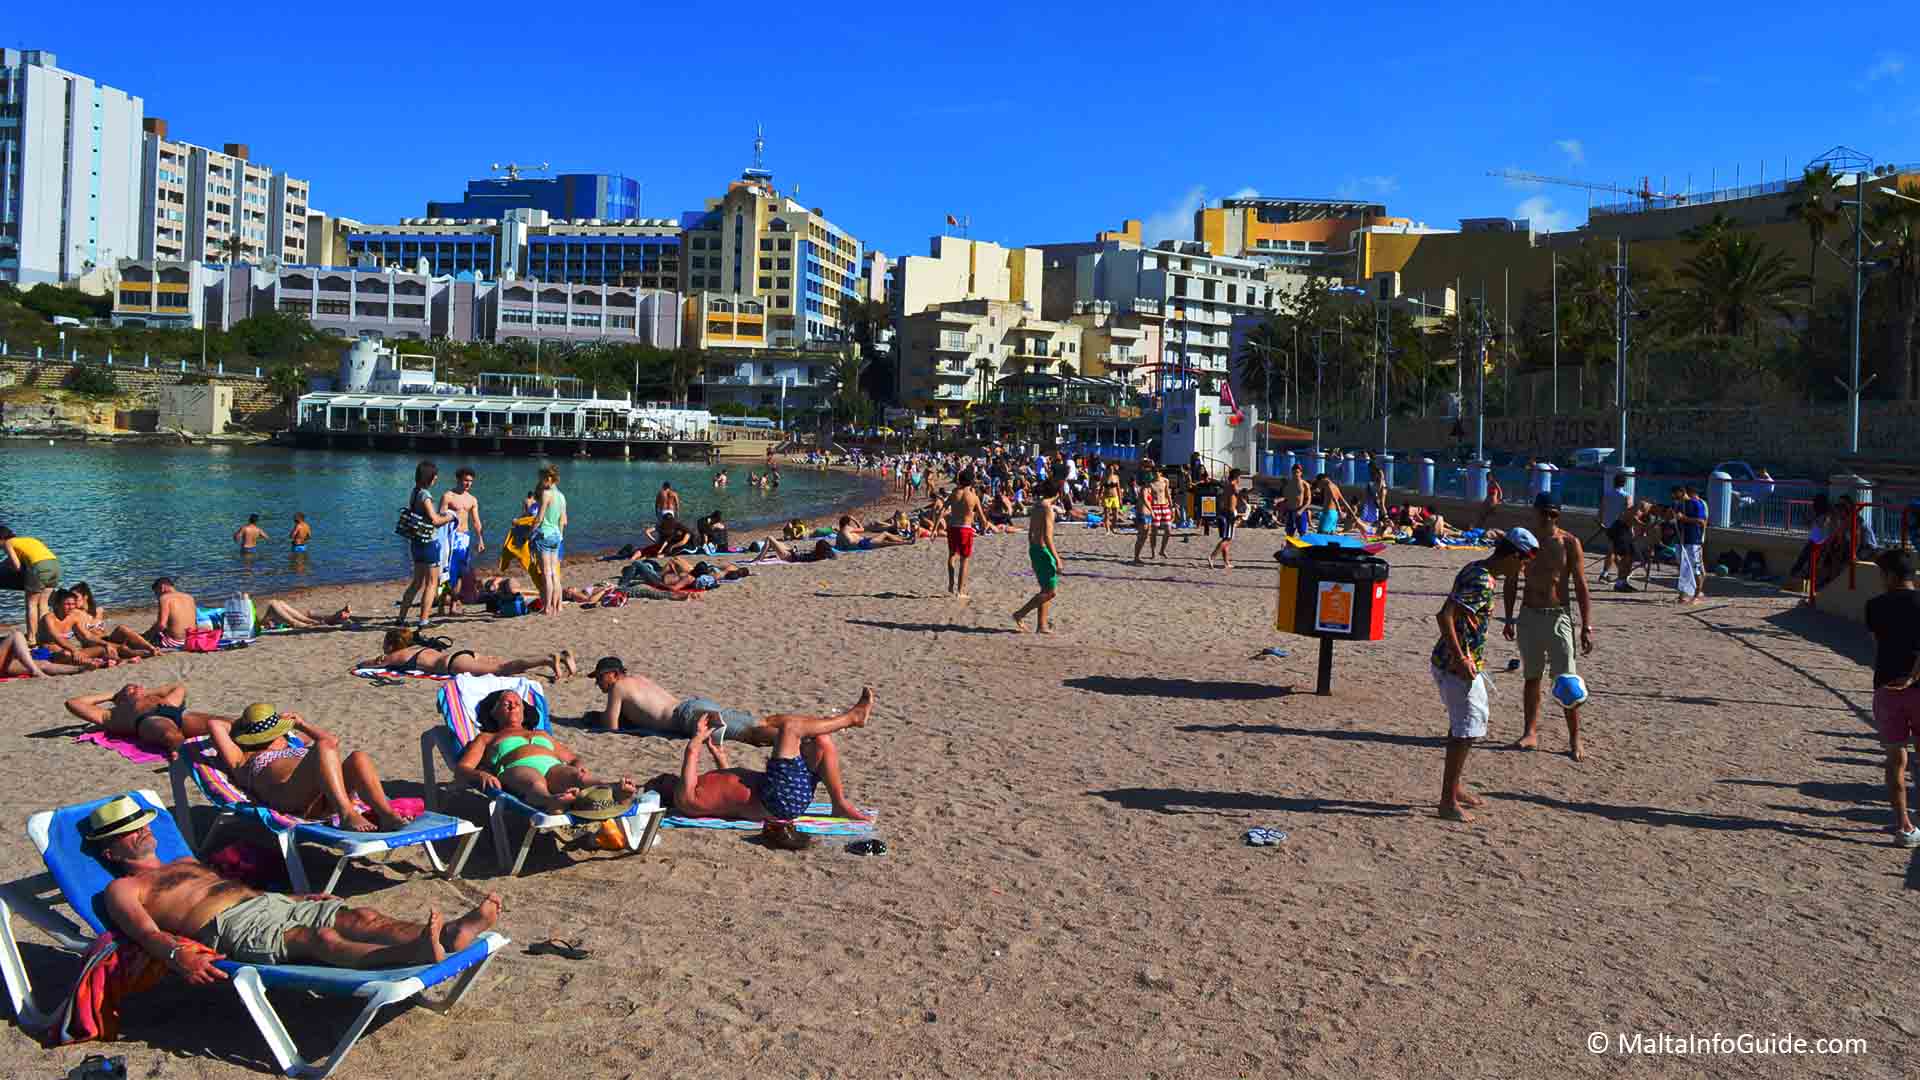 St. George's Bay packed with people during summer